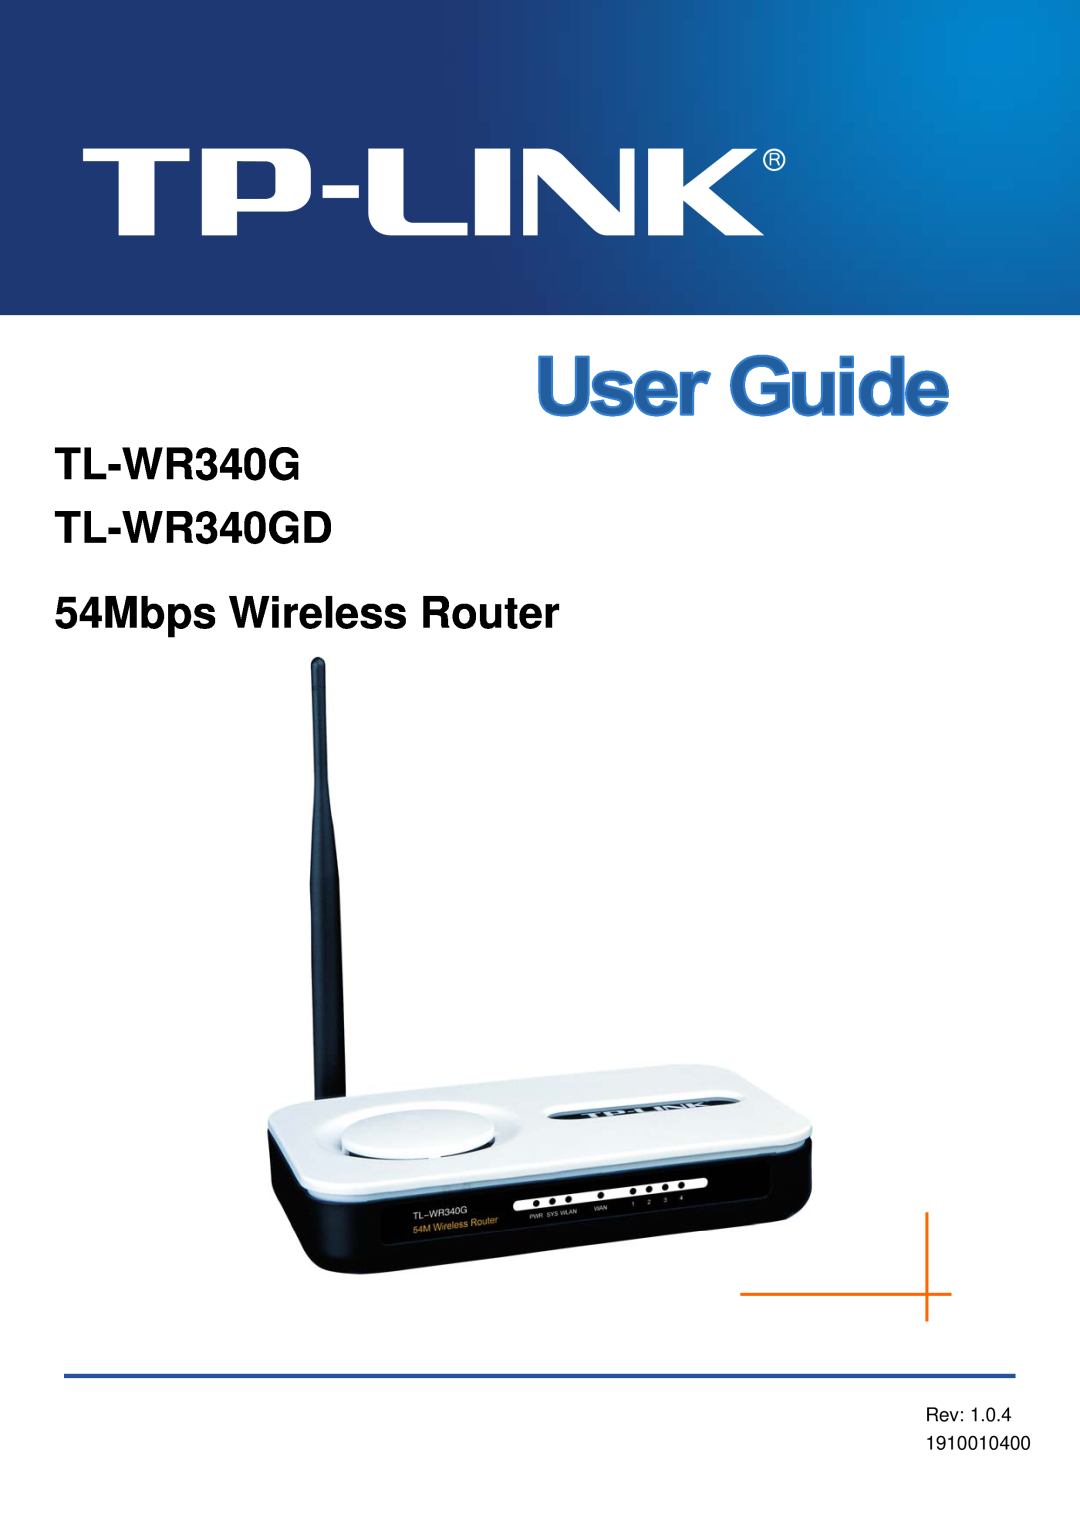 TP-Link manual TL-WR340G TL-WR340GD 54Mbps Wireless Router, Rev 1.0.4 